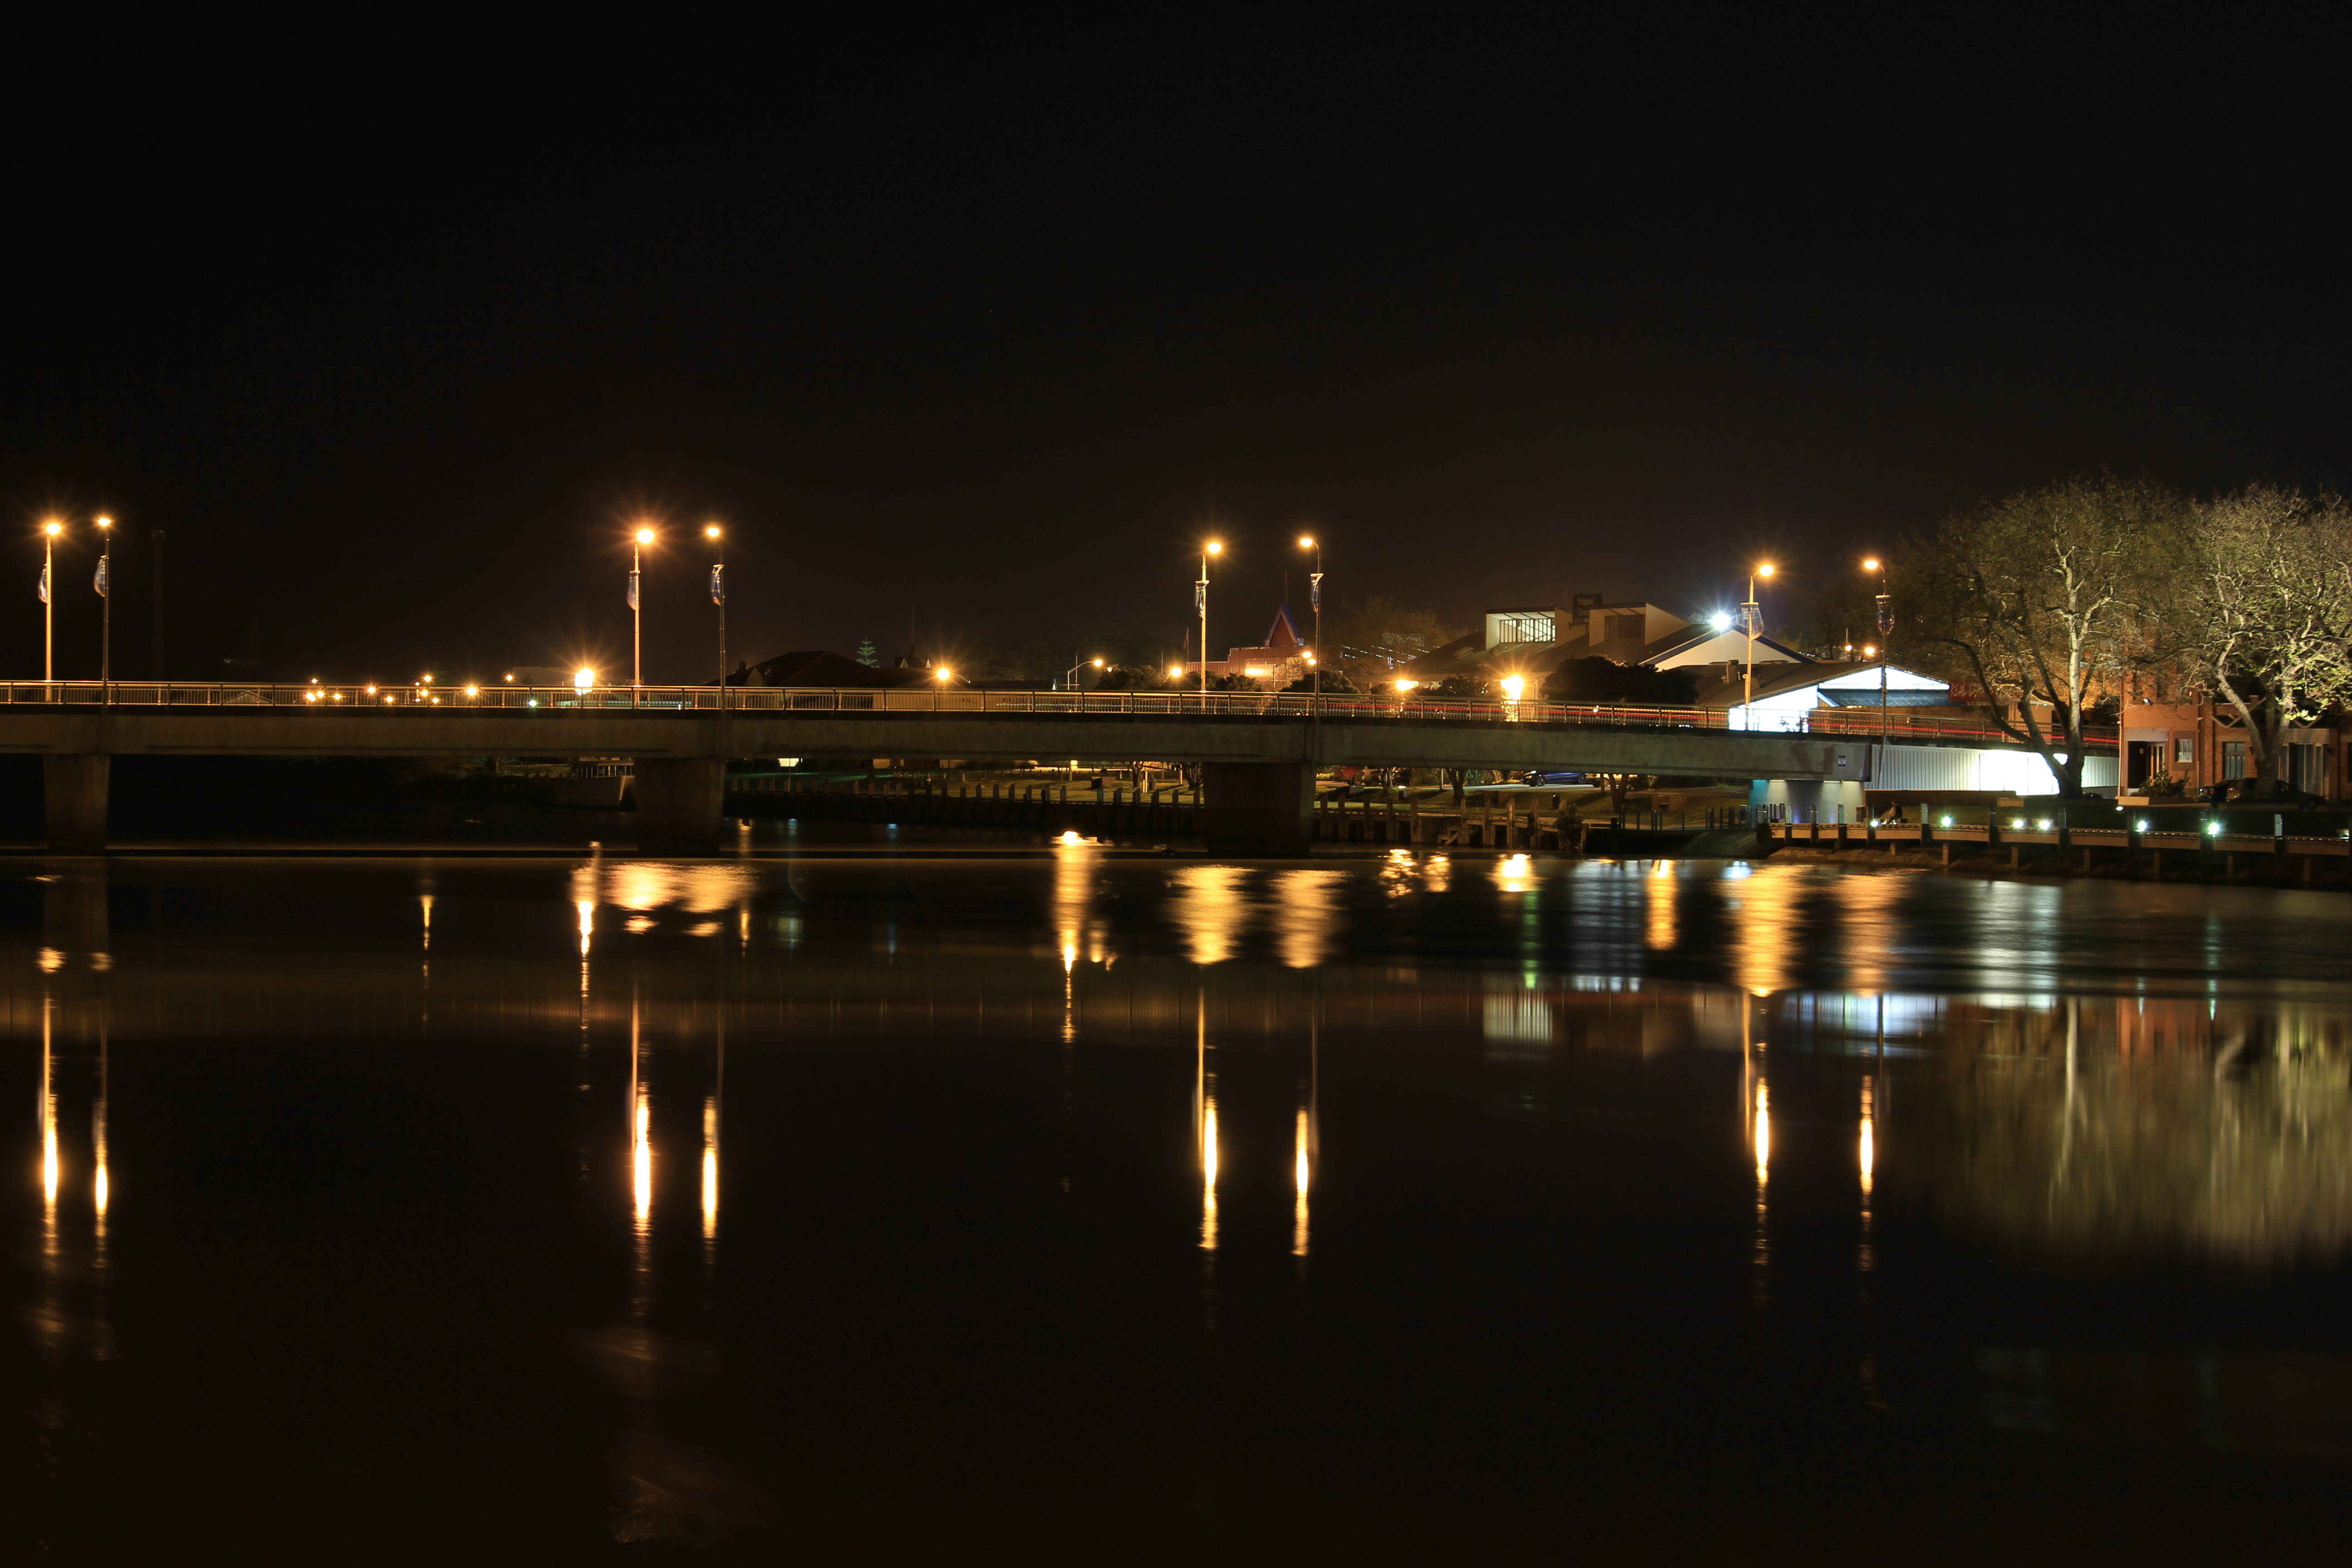 Nighttime scenery of Wanganui River, captured by Blizzardnz. Serene river reflecting soft light.